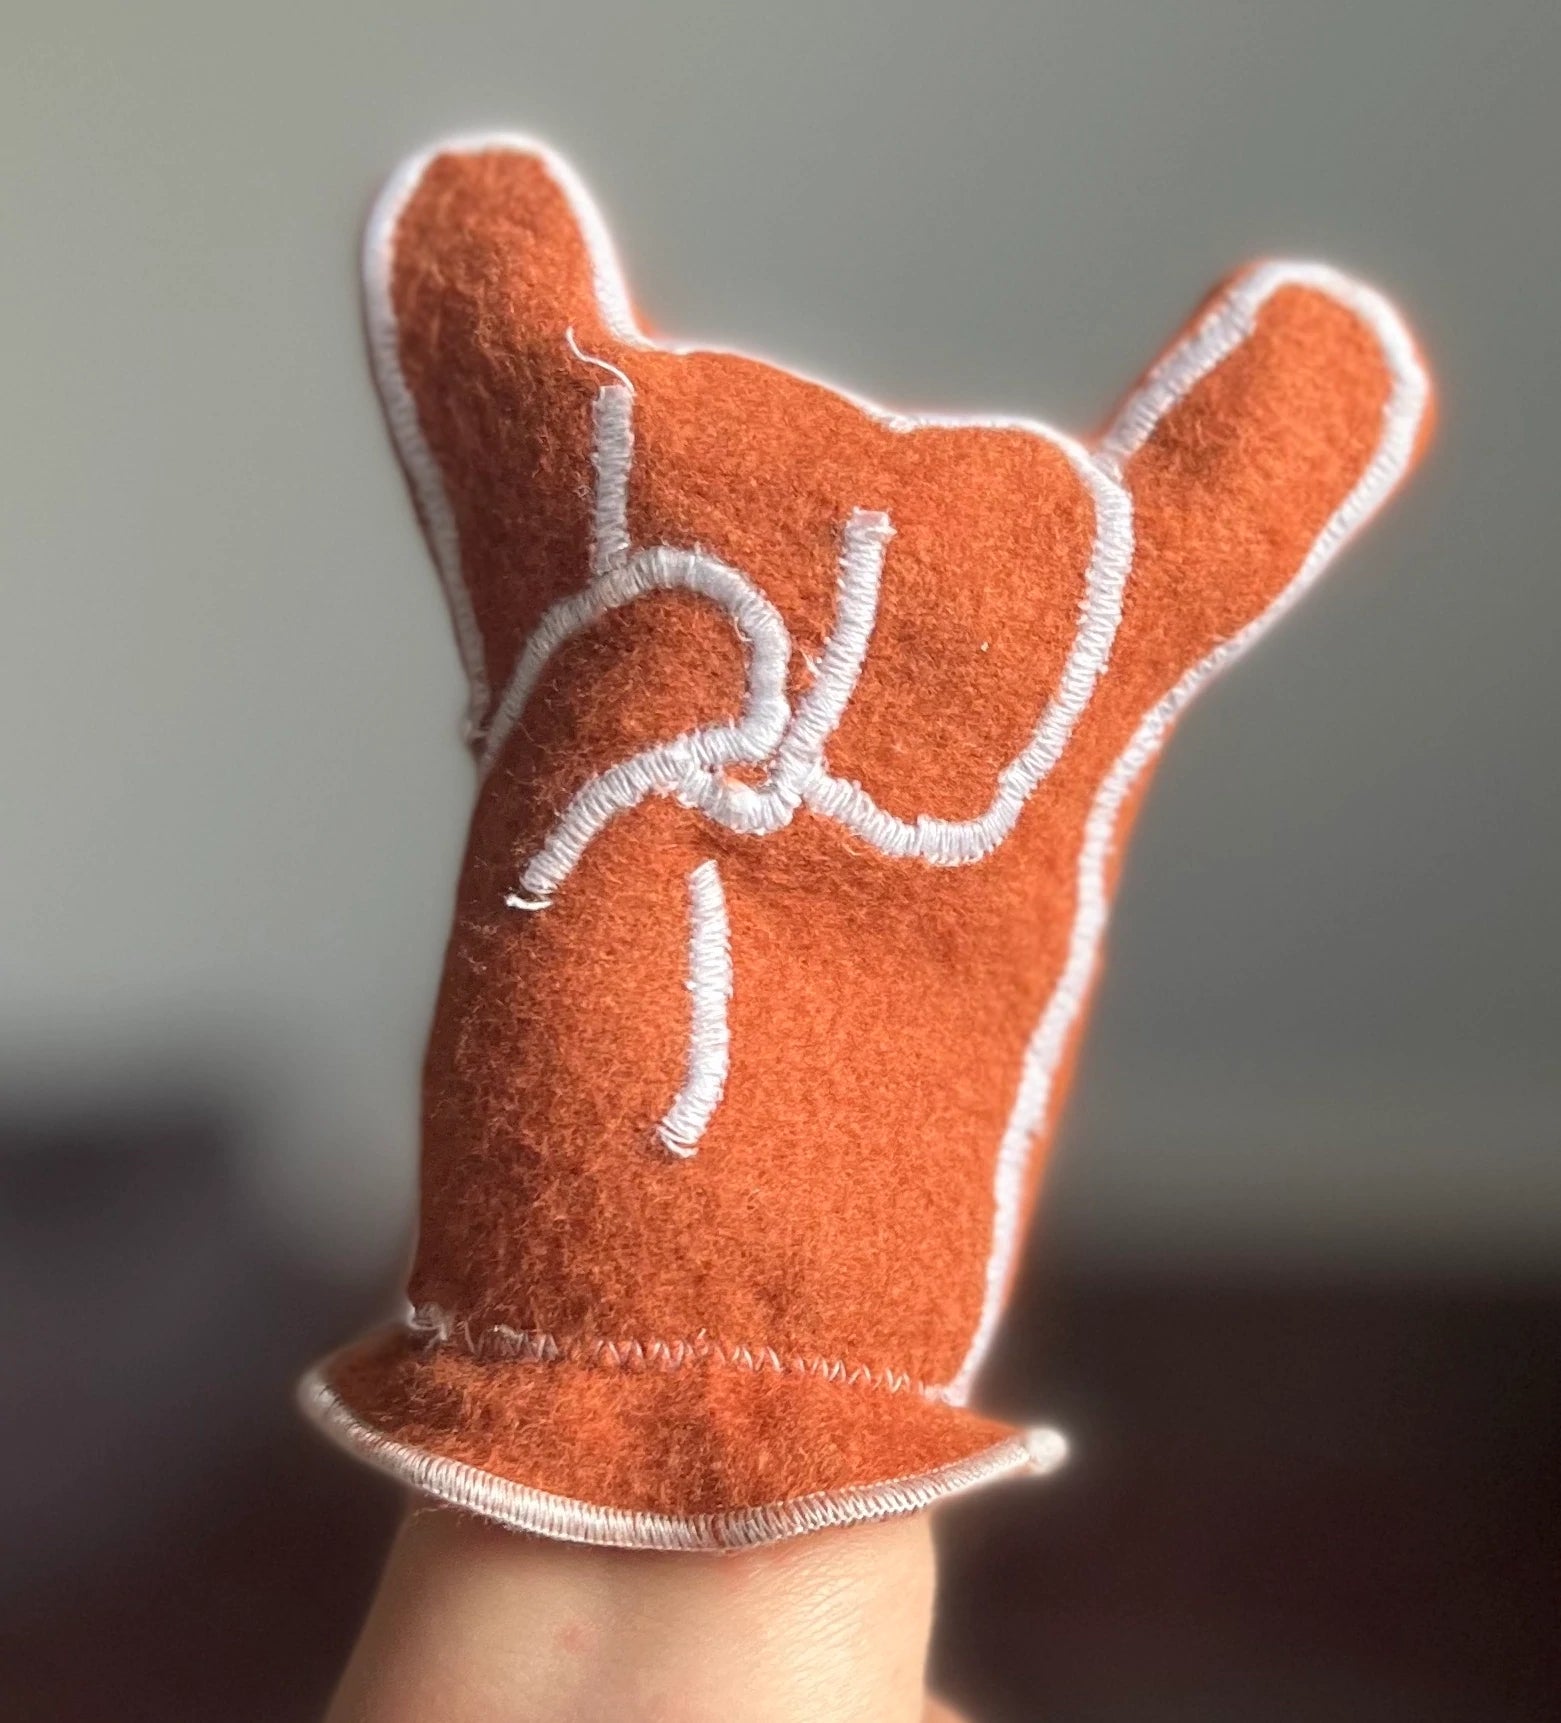 a look at our officially licensed Texas Longhorns mitten for newborns and infants 